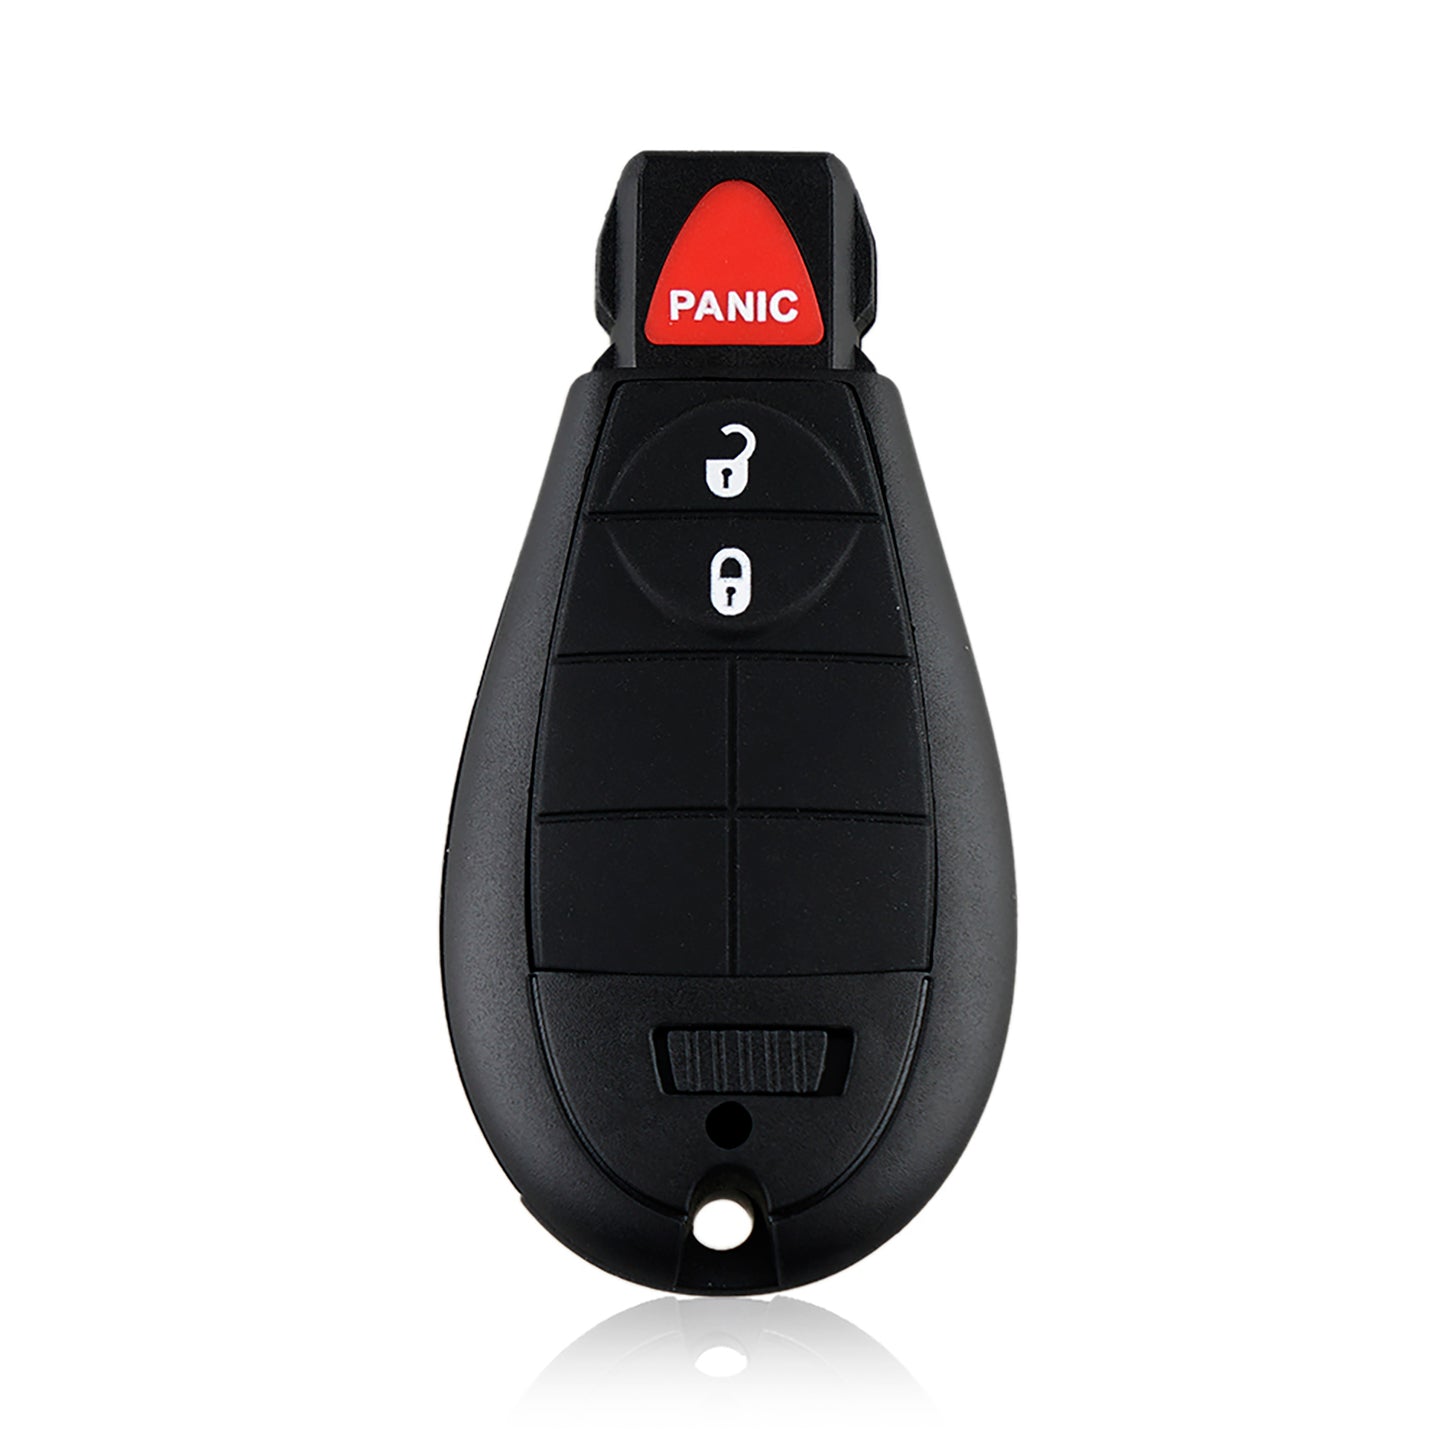 3 Buttons 433MHz Keyless Entry Fob Remote Car Key For 2014 - 2020 Jeep Cherokee FCC ID:GQ4-53T SKU : J911